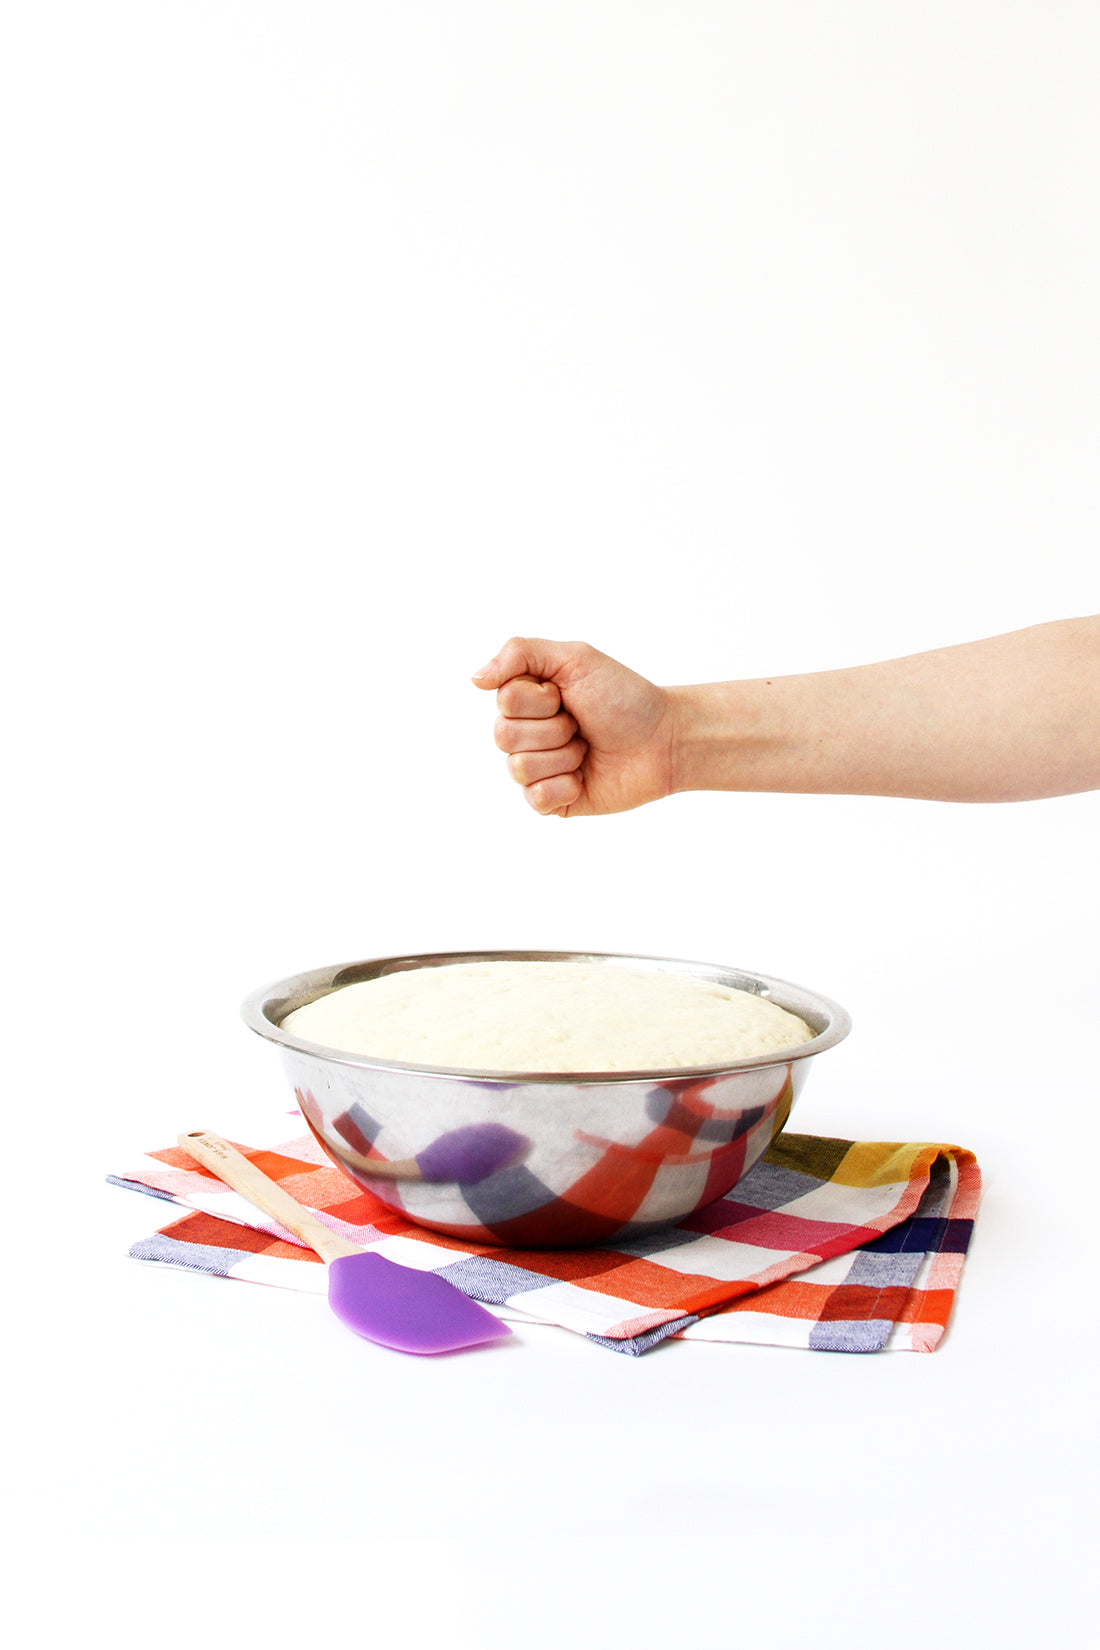 Image of dough in mixing bowl with hand above for Miss Jones Baking Co Cake Mix Cinnamon Rolls Recipe